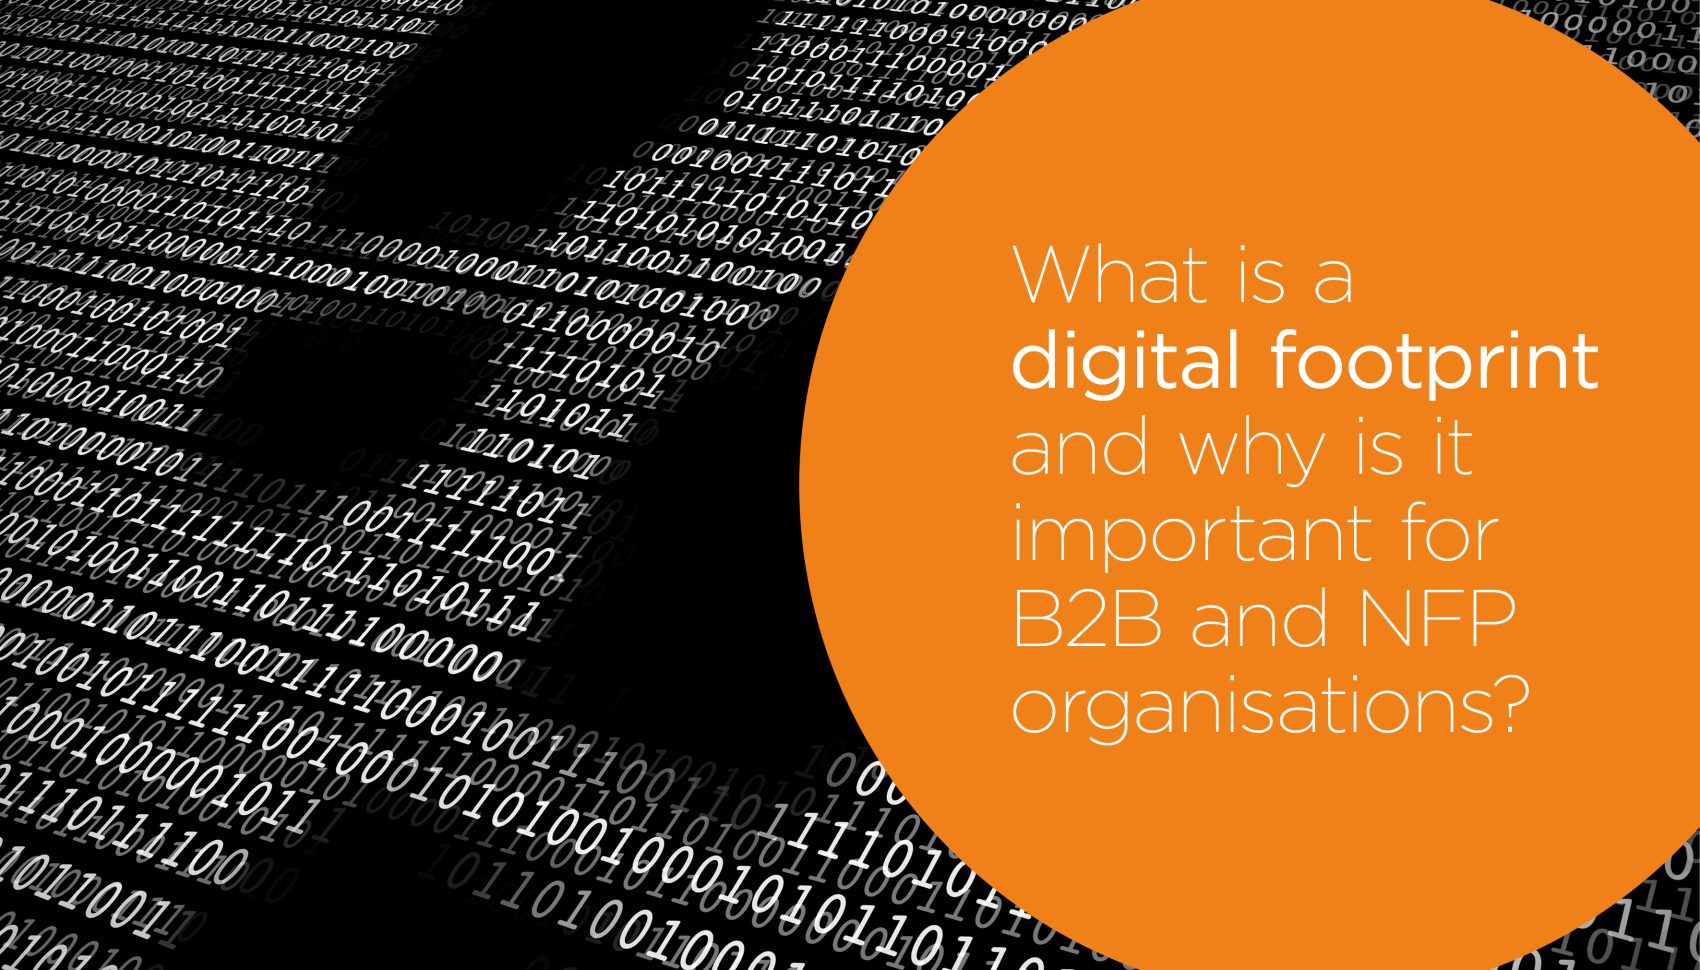 What is a Digital Footprint and why is it important for B2B and NFP organisations?